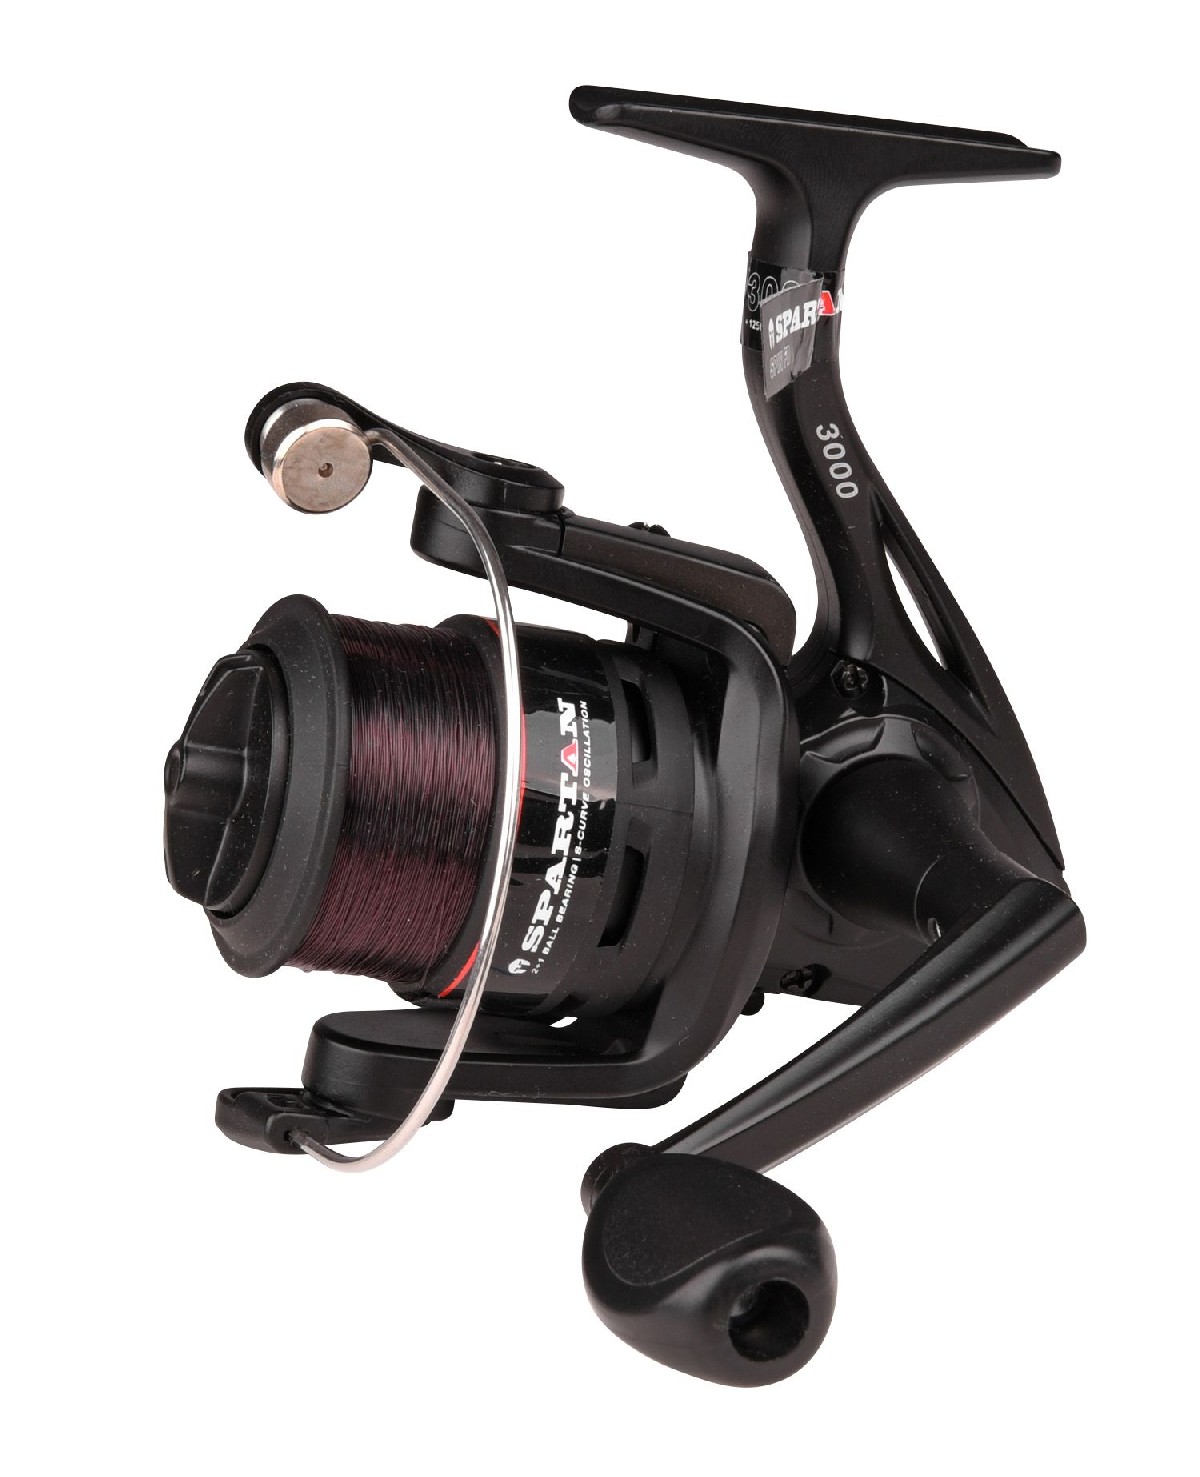 Spro Spartan Reel 5000 Spooled With 0,37 mm Mono